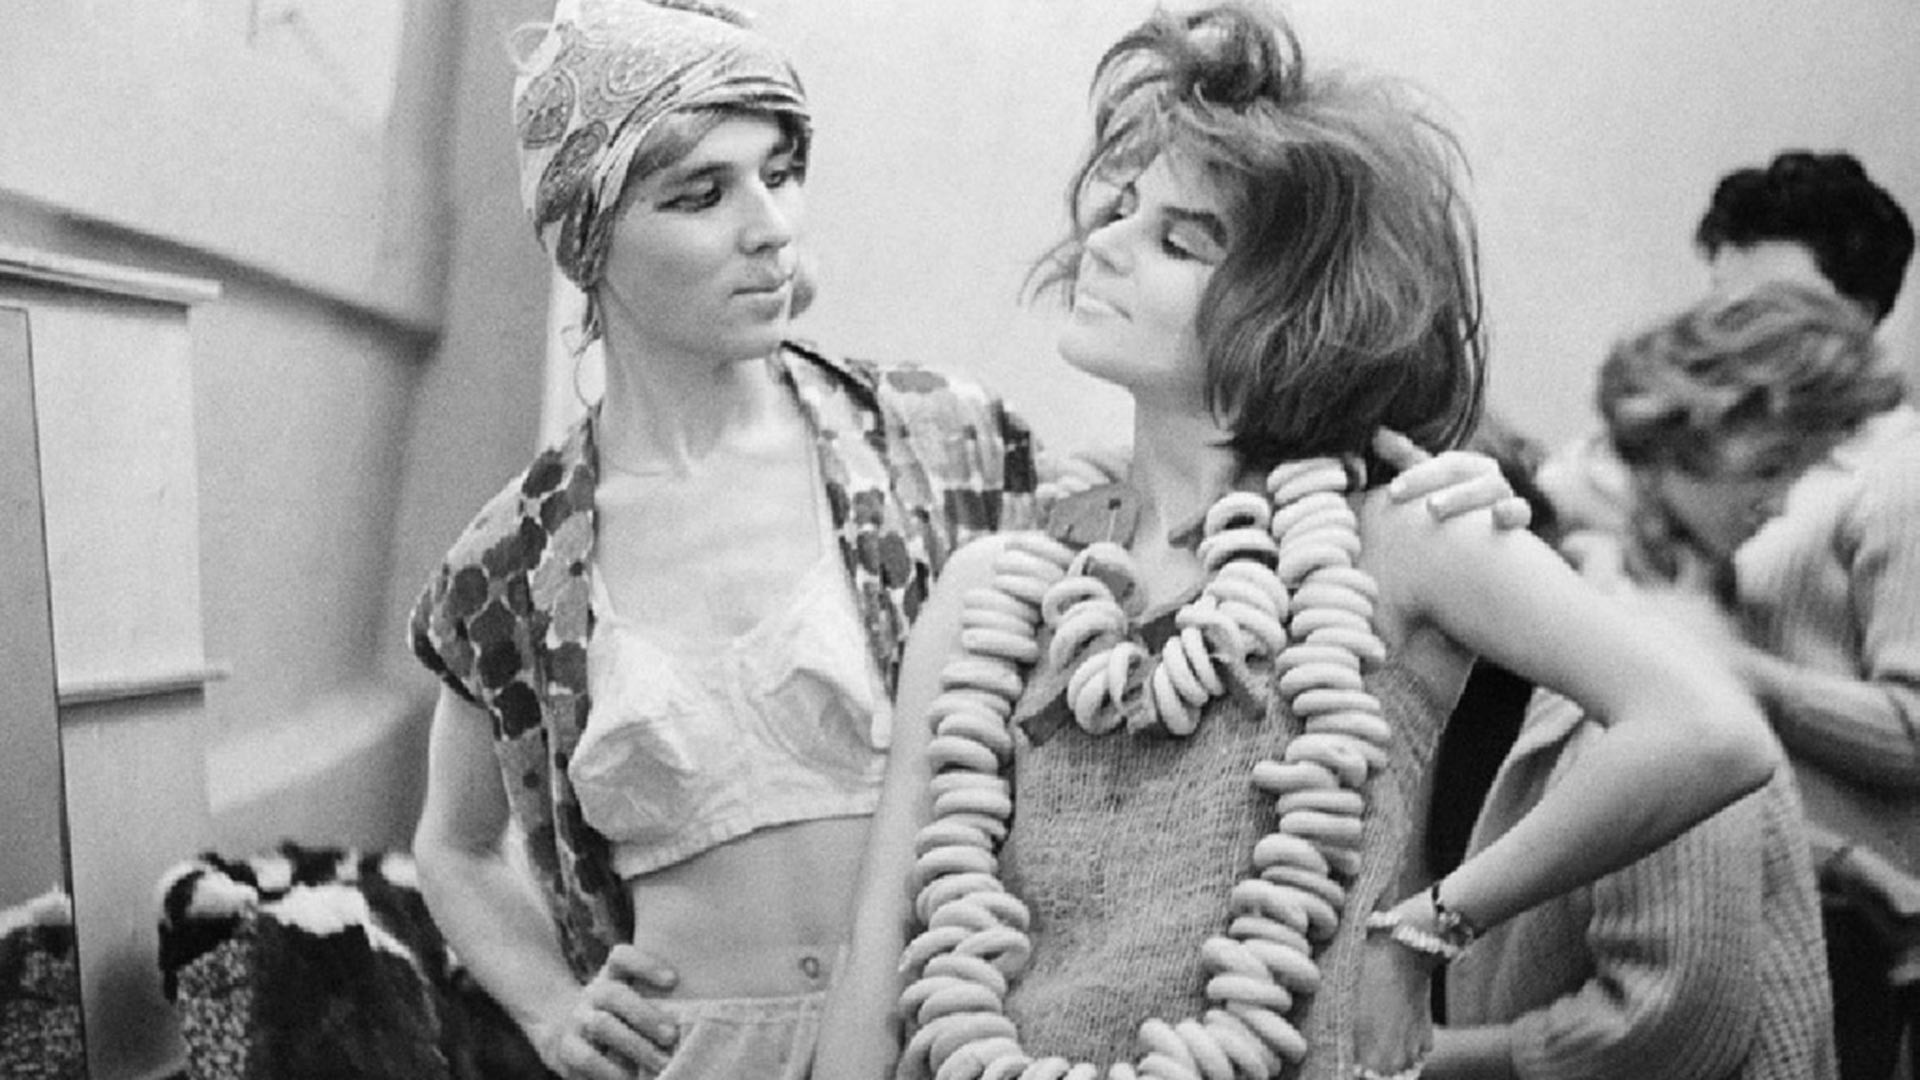 Behind the scenes of a fashion show put on by designer Vyacheslav Zaitsev, 1966.